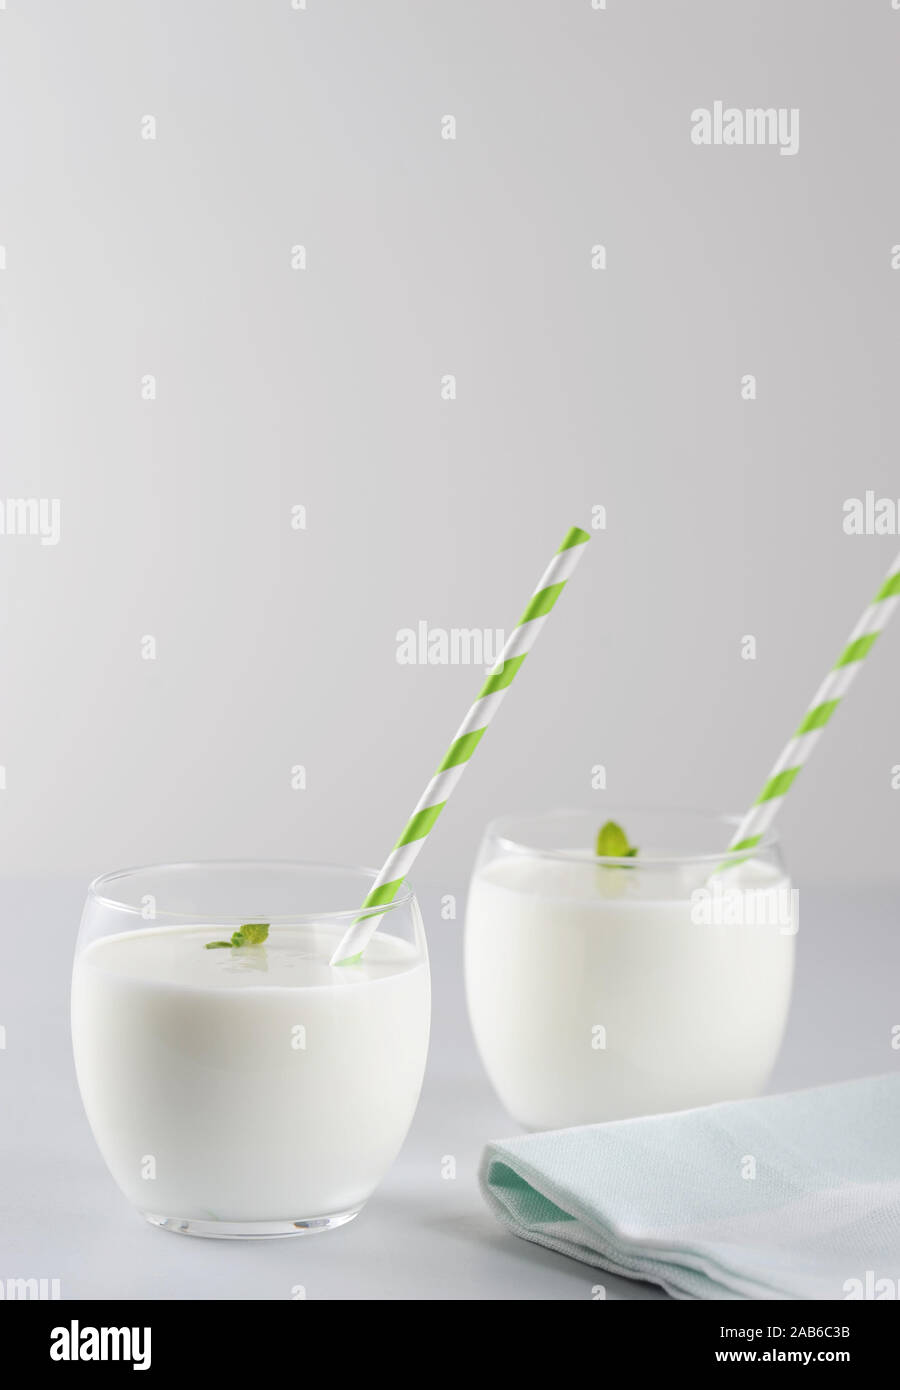 Ayran, yogurt drink (kefir, lassi) with mint leaf in two glasses. Refreshing cold drink.Vertical orientation with copy space,selective focus. Stock Photo